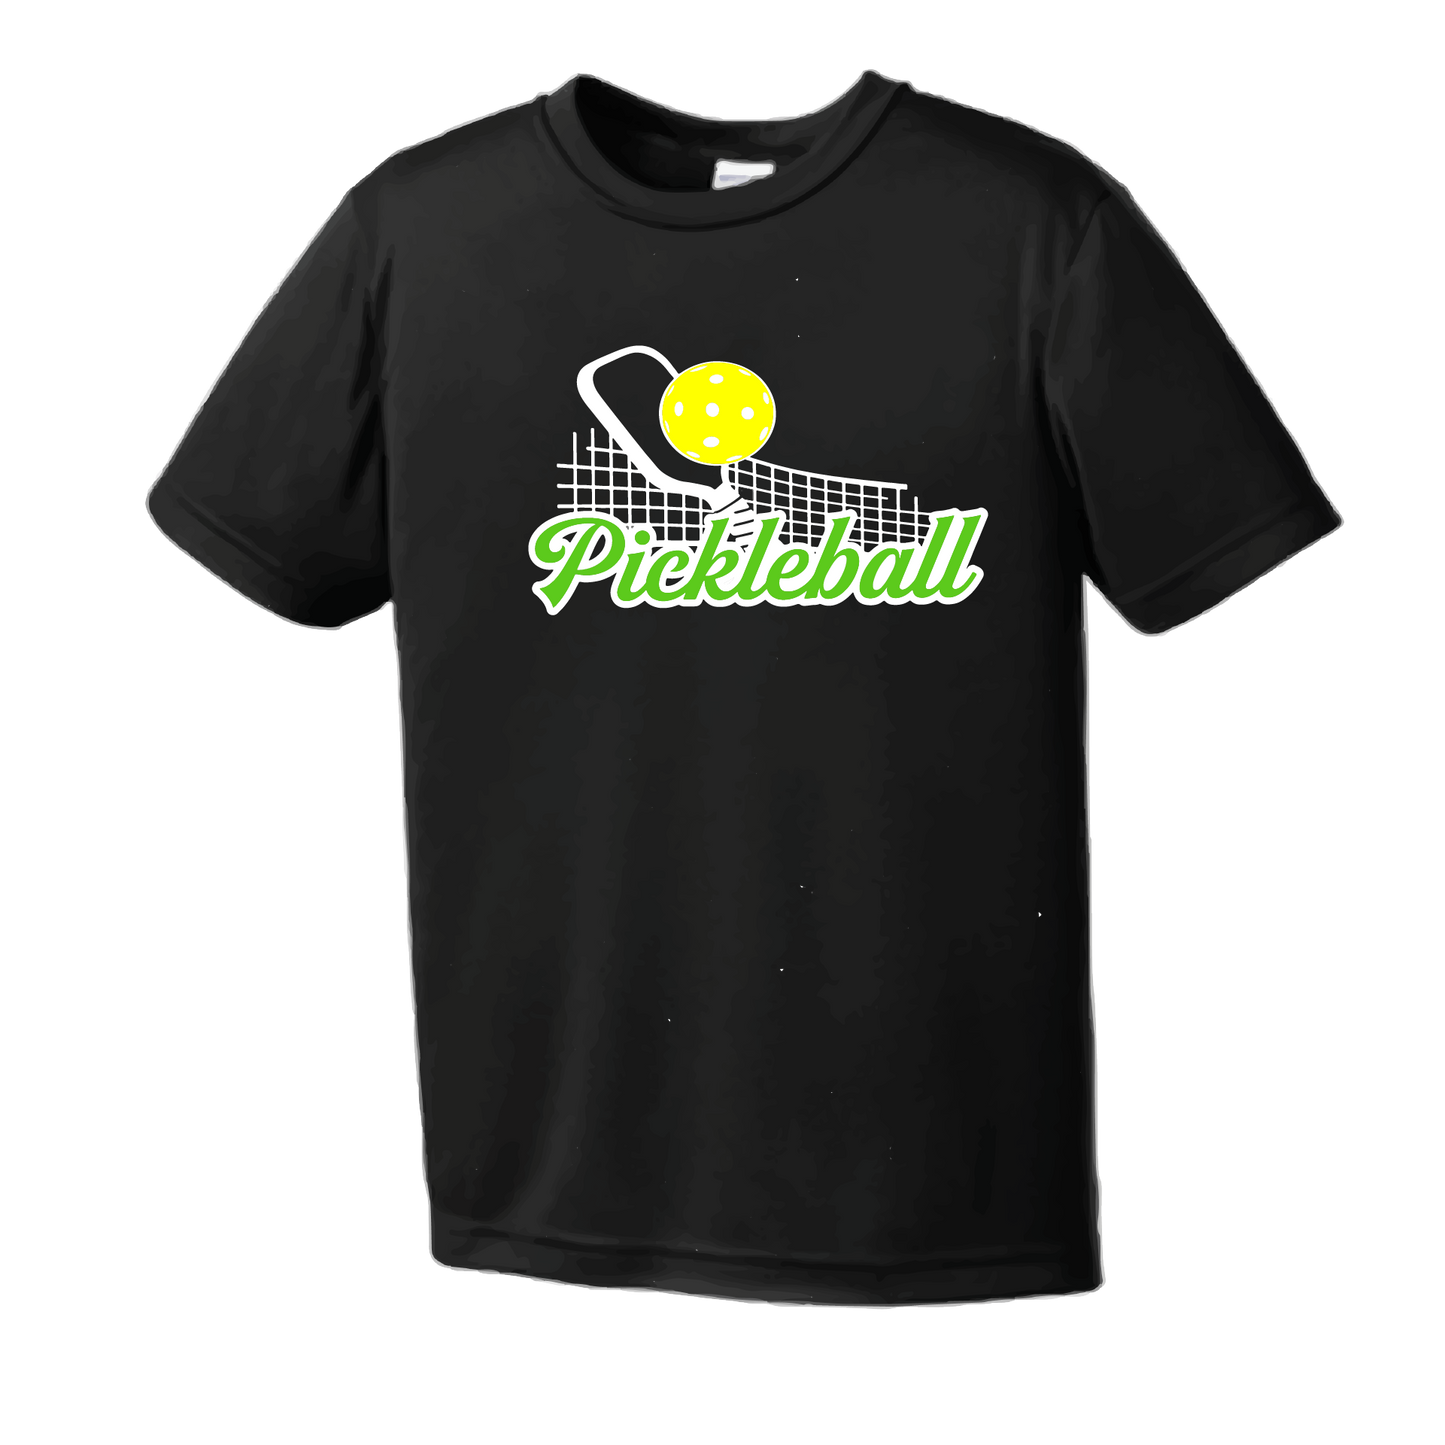 Pickleball Design: Pickleball Net  Men's Style:  Short Sleeve  Shirts are lightweight, roomy and highly breathable. These moisture-wicking shirts are designed for athletic performance. They feature PosiCharge technology to lock in color and prevent logos from fading. Removable tag and set-in sleeves for comfort.